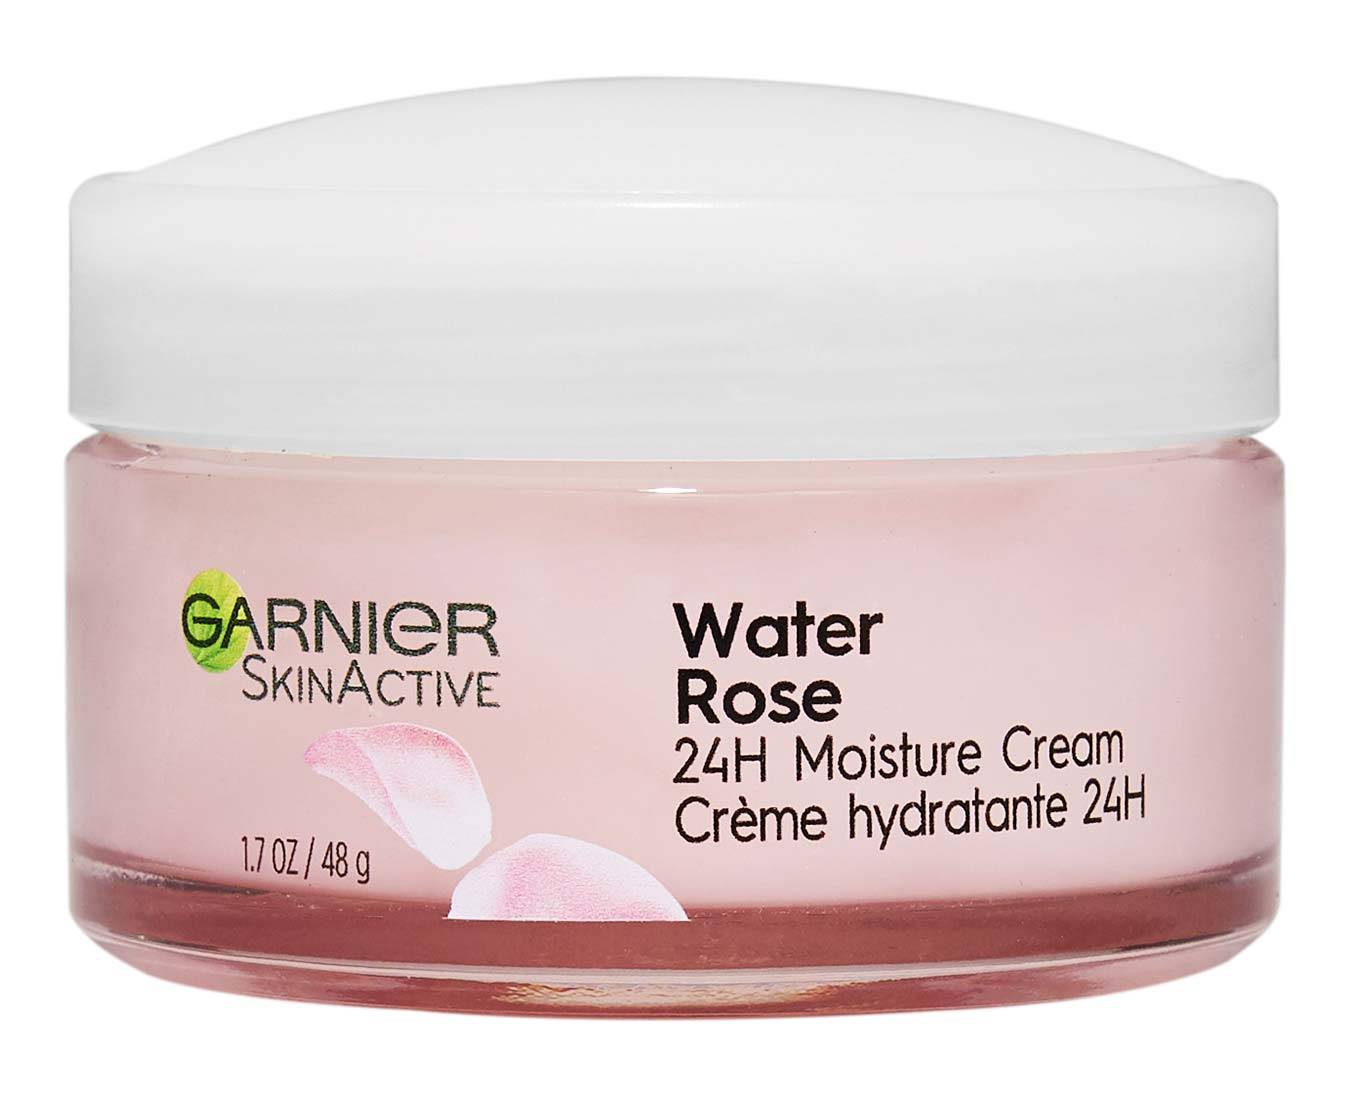 Garnier Skinactive 24H Moisture Cream With Rose Water And Hyaluronic Acid